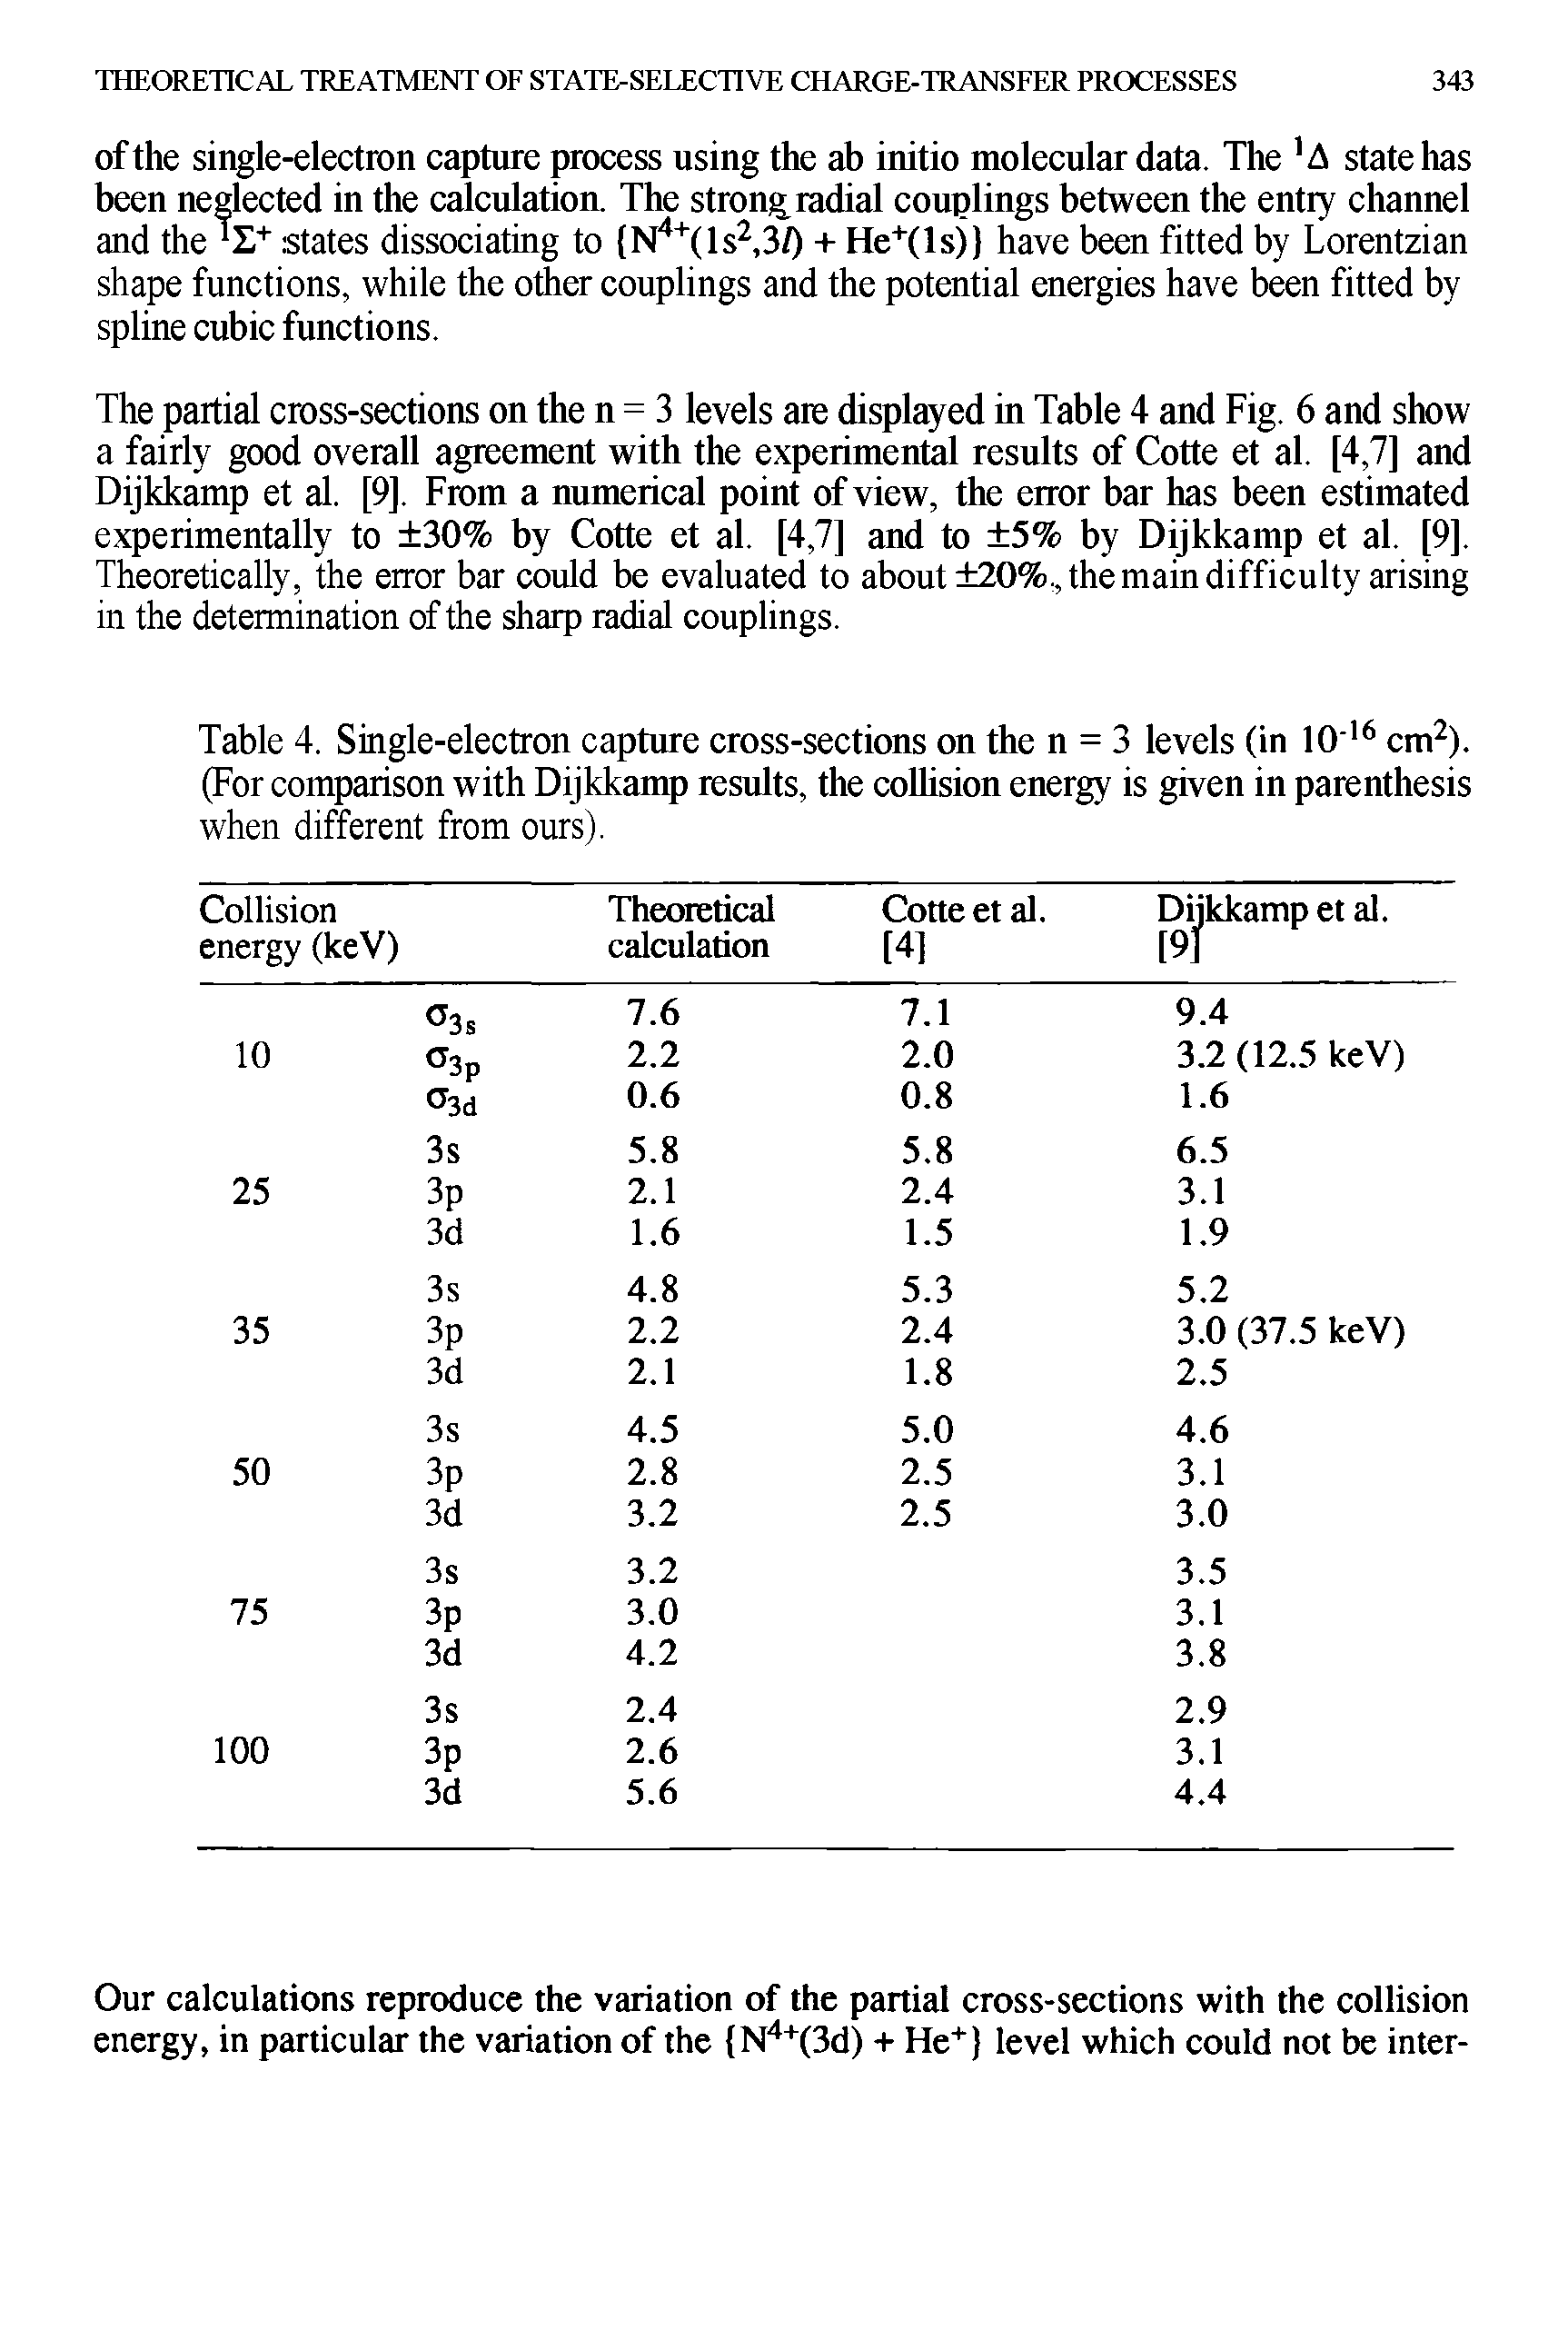 Table 4. Single-electron capture cross-sections on the n = 3 levels (in 10 cm ). (For comparison with Dijkkamp results, the collision energy is given in parenthesis...